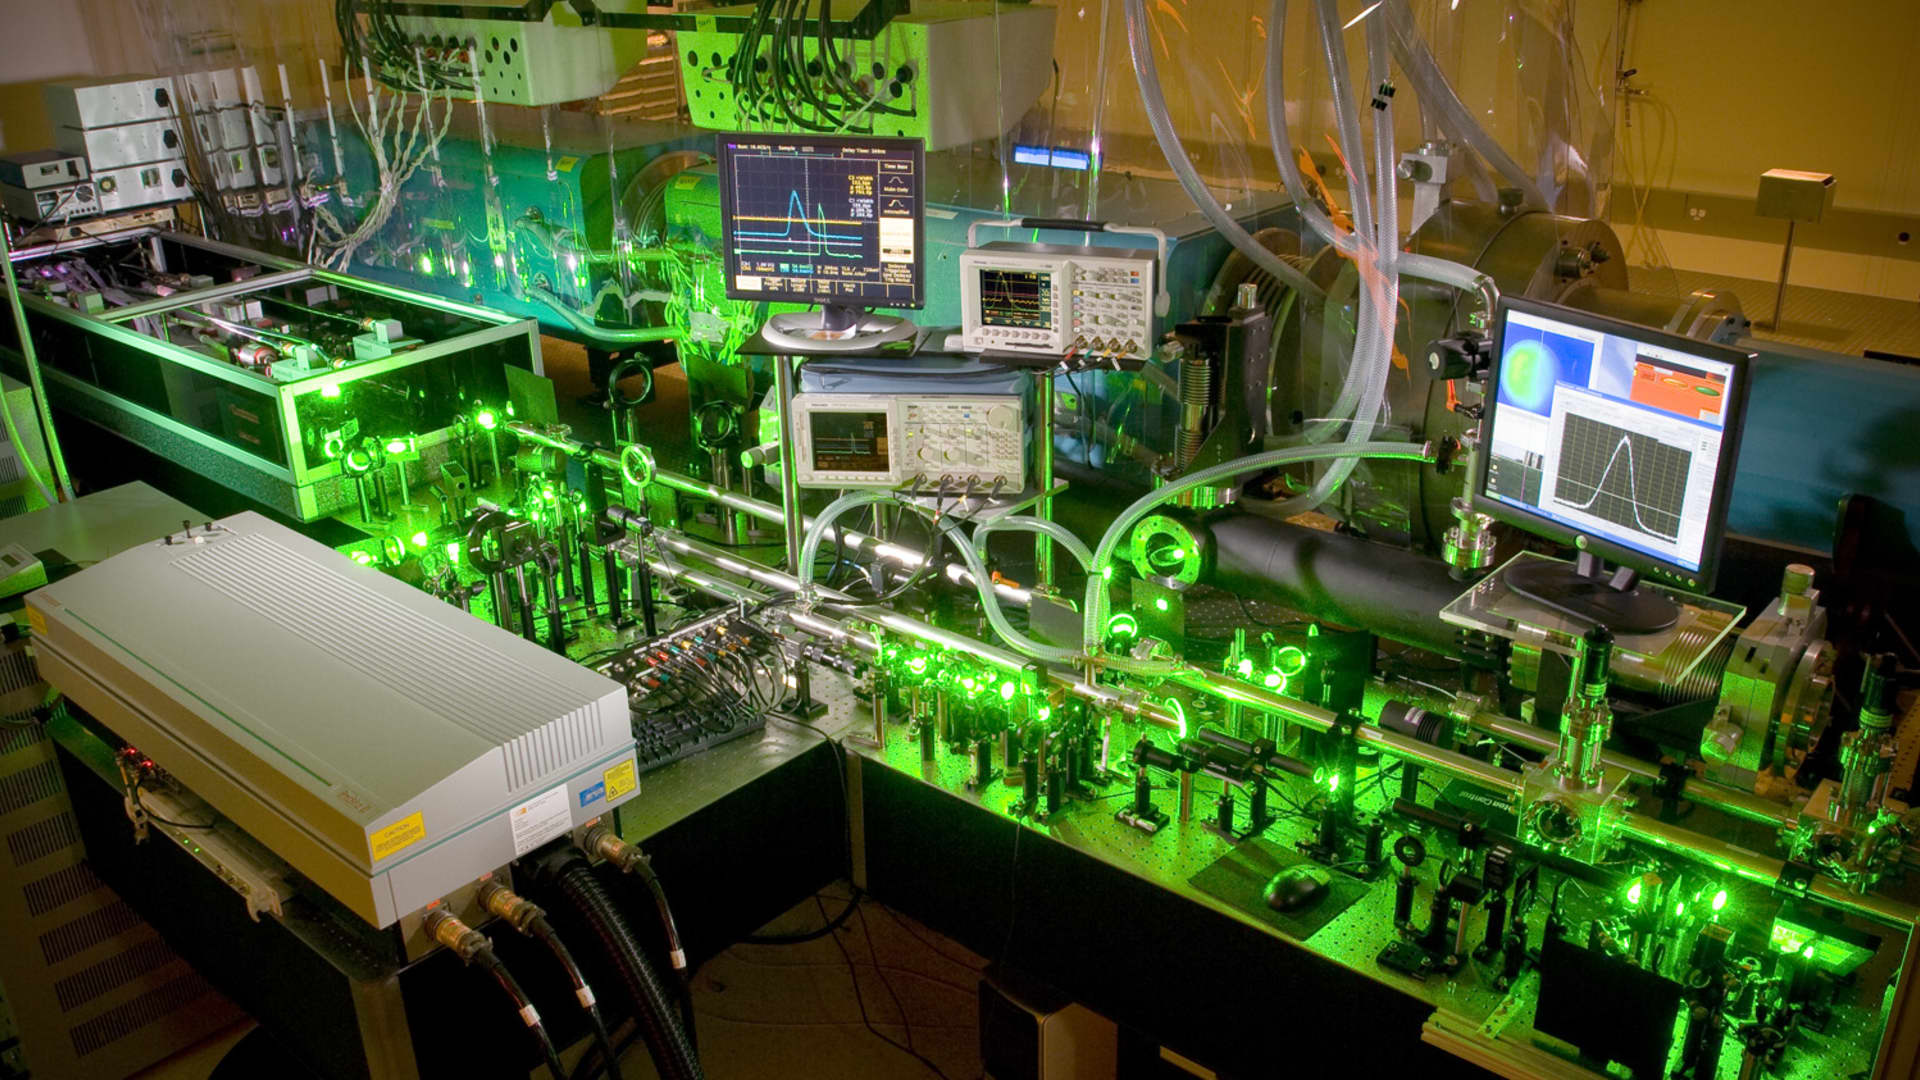 Inside what's called the amplifier bay of the Texas Petawatt Laser, where the energy of a laser pulse is boosted. The green light are the pump lasers that amplify or boost the energy of the main laser.